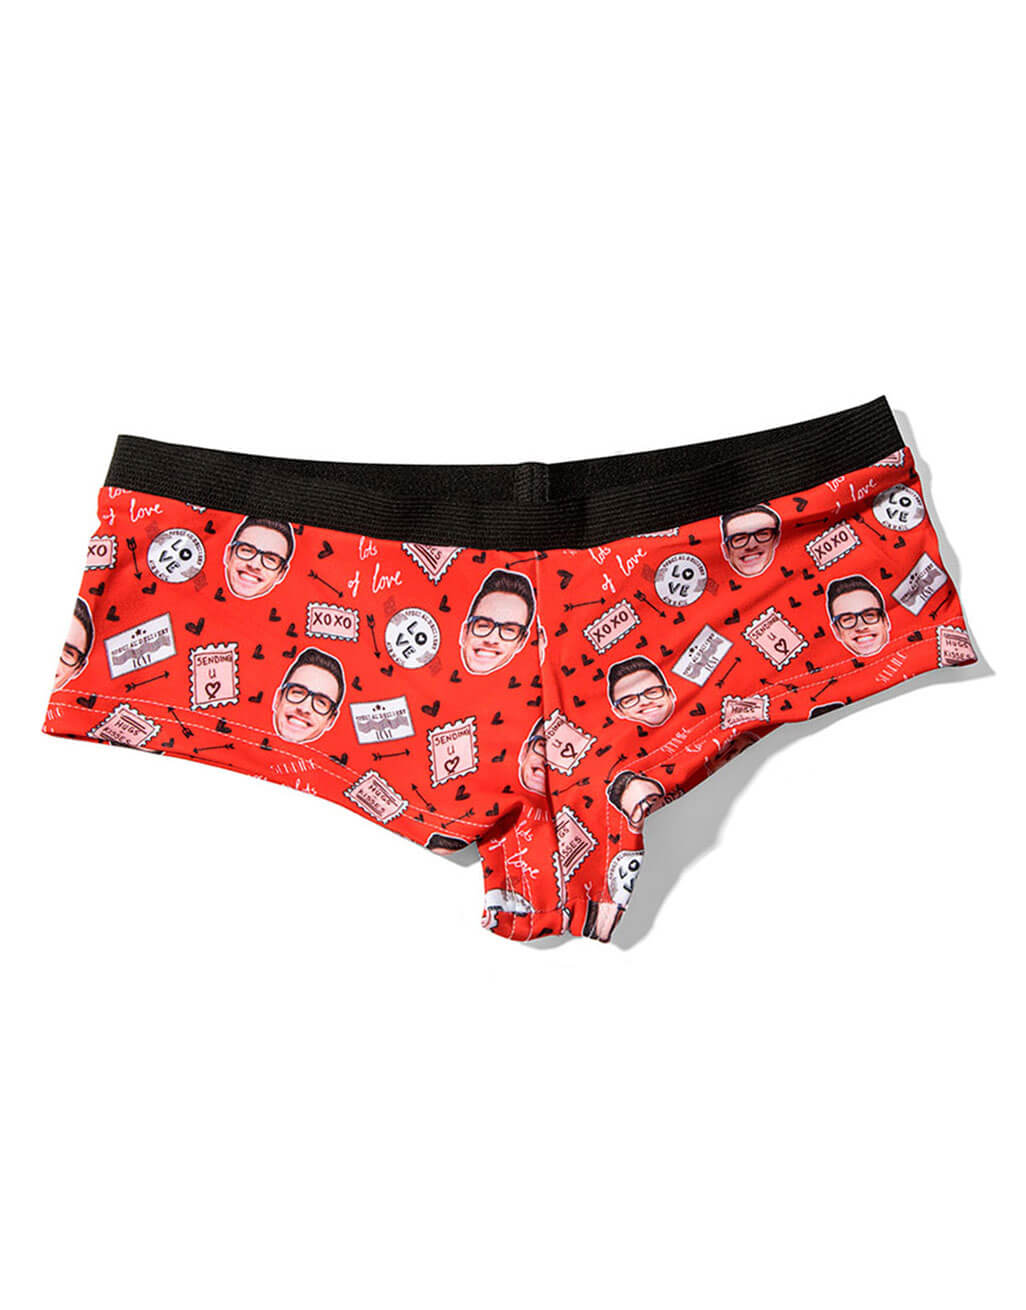 I Love Her P Love His D, Naughty Panties And Men Boxers Brief, Couple  Matching Underwear, Valentines Gift, Funny Panties, Anniversary Gift